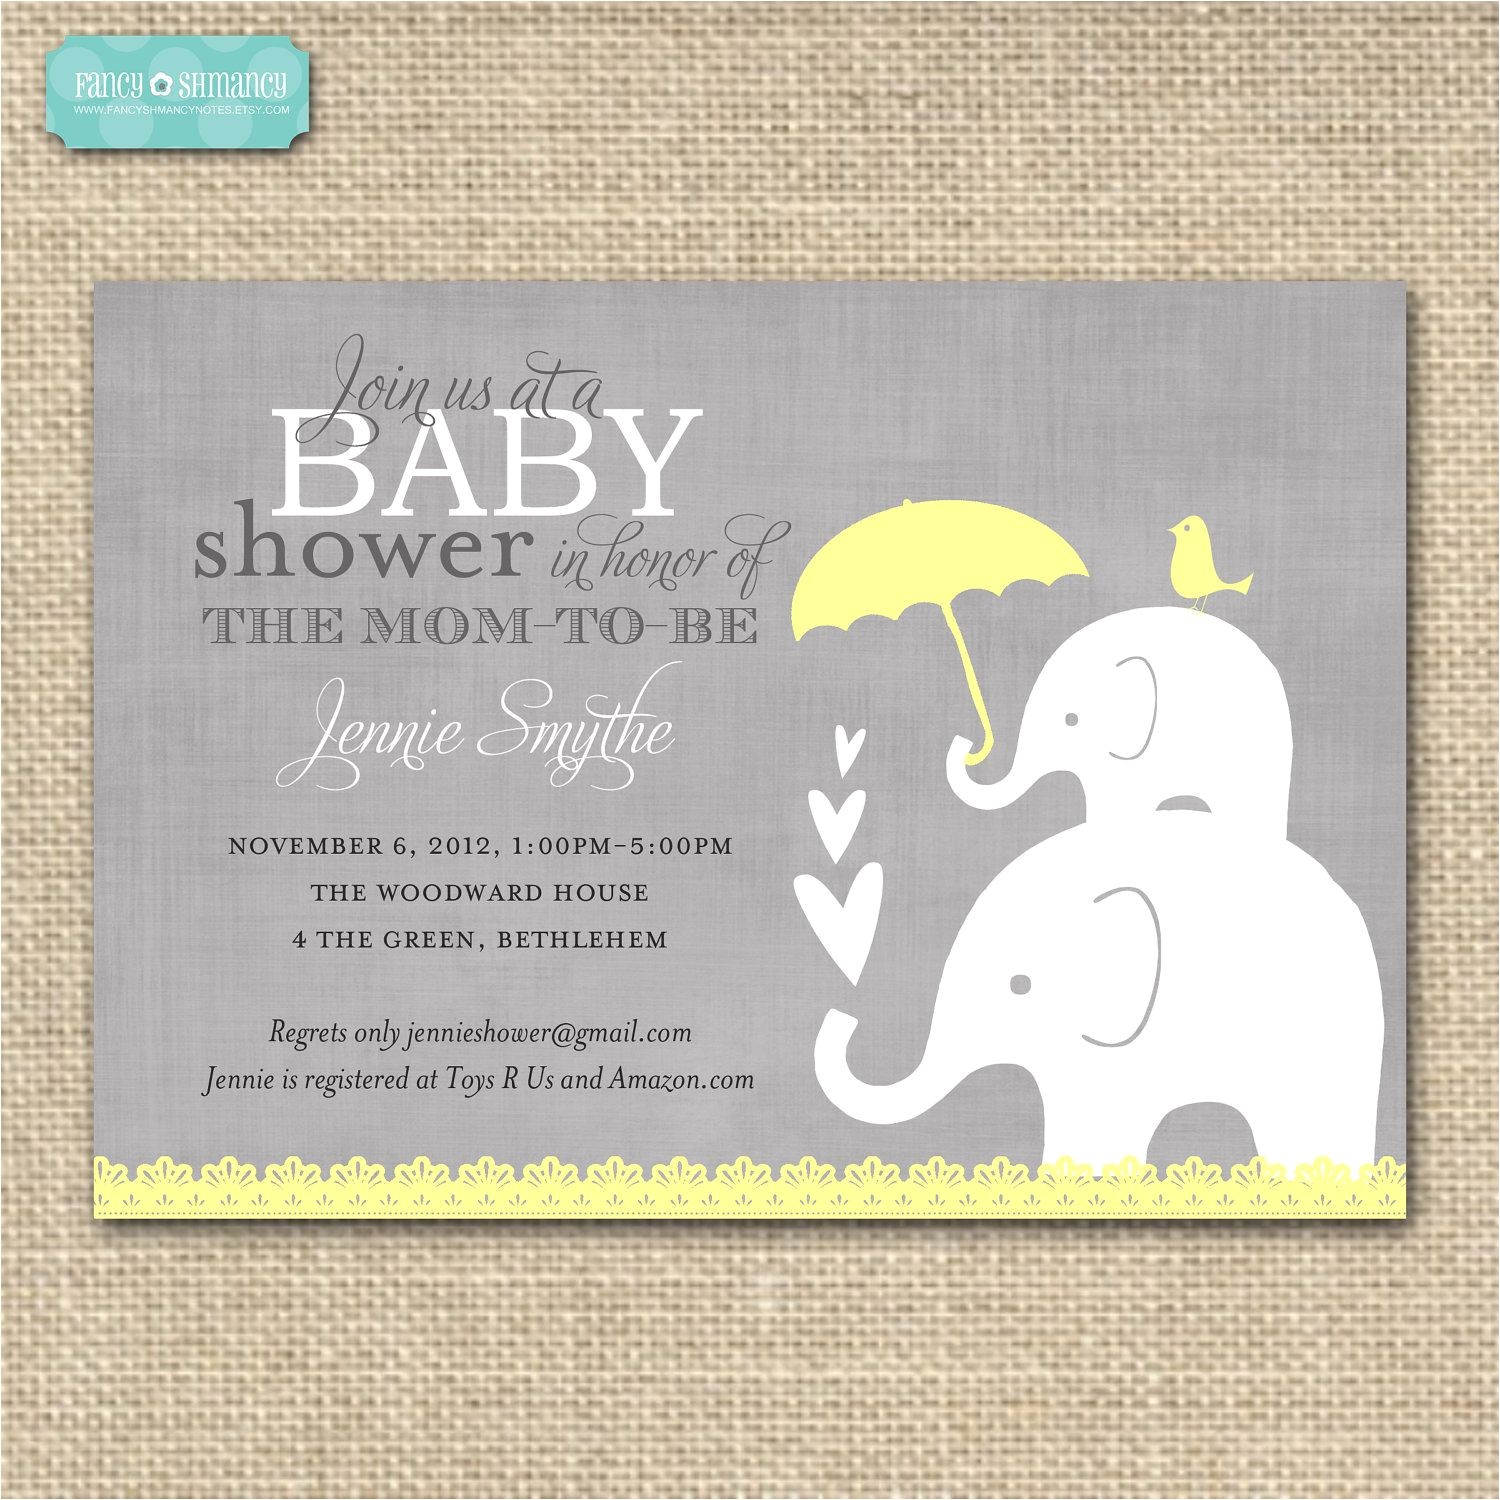 Baby Shower Invites with Elephants Baby Shower Invitation Elephant Yellow and Grey Printable